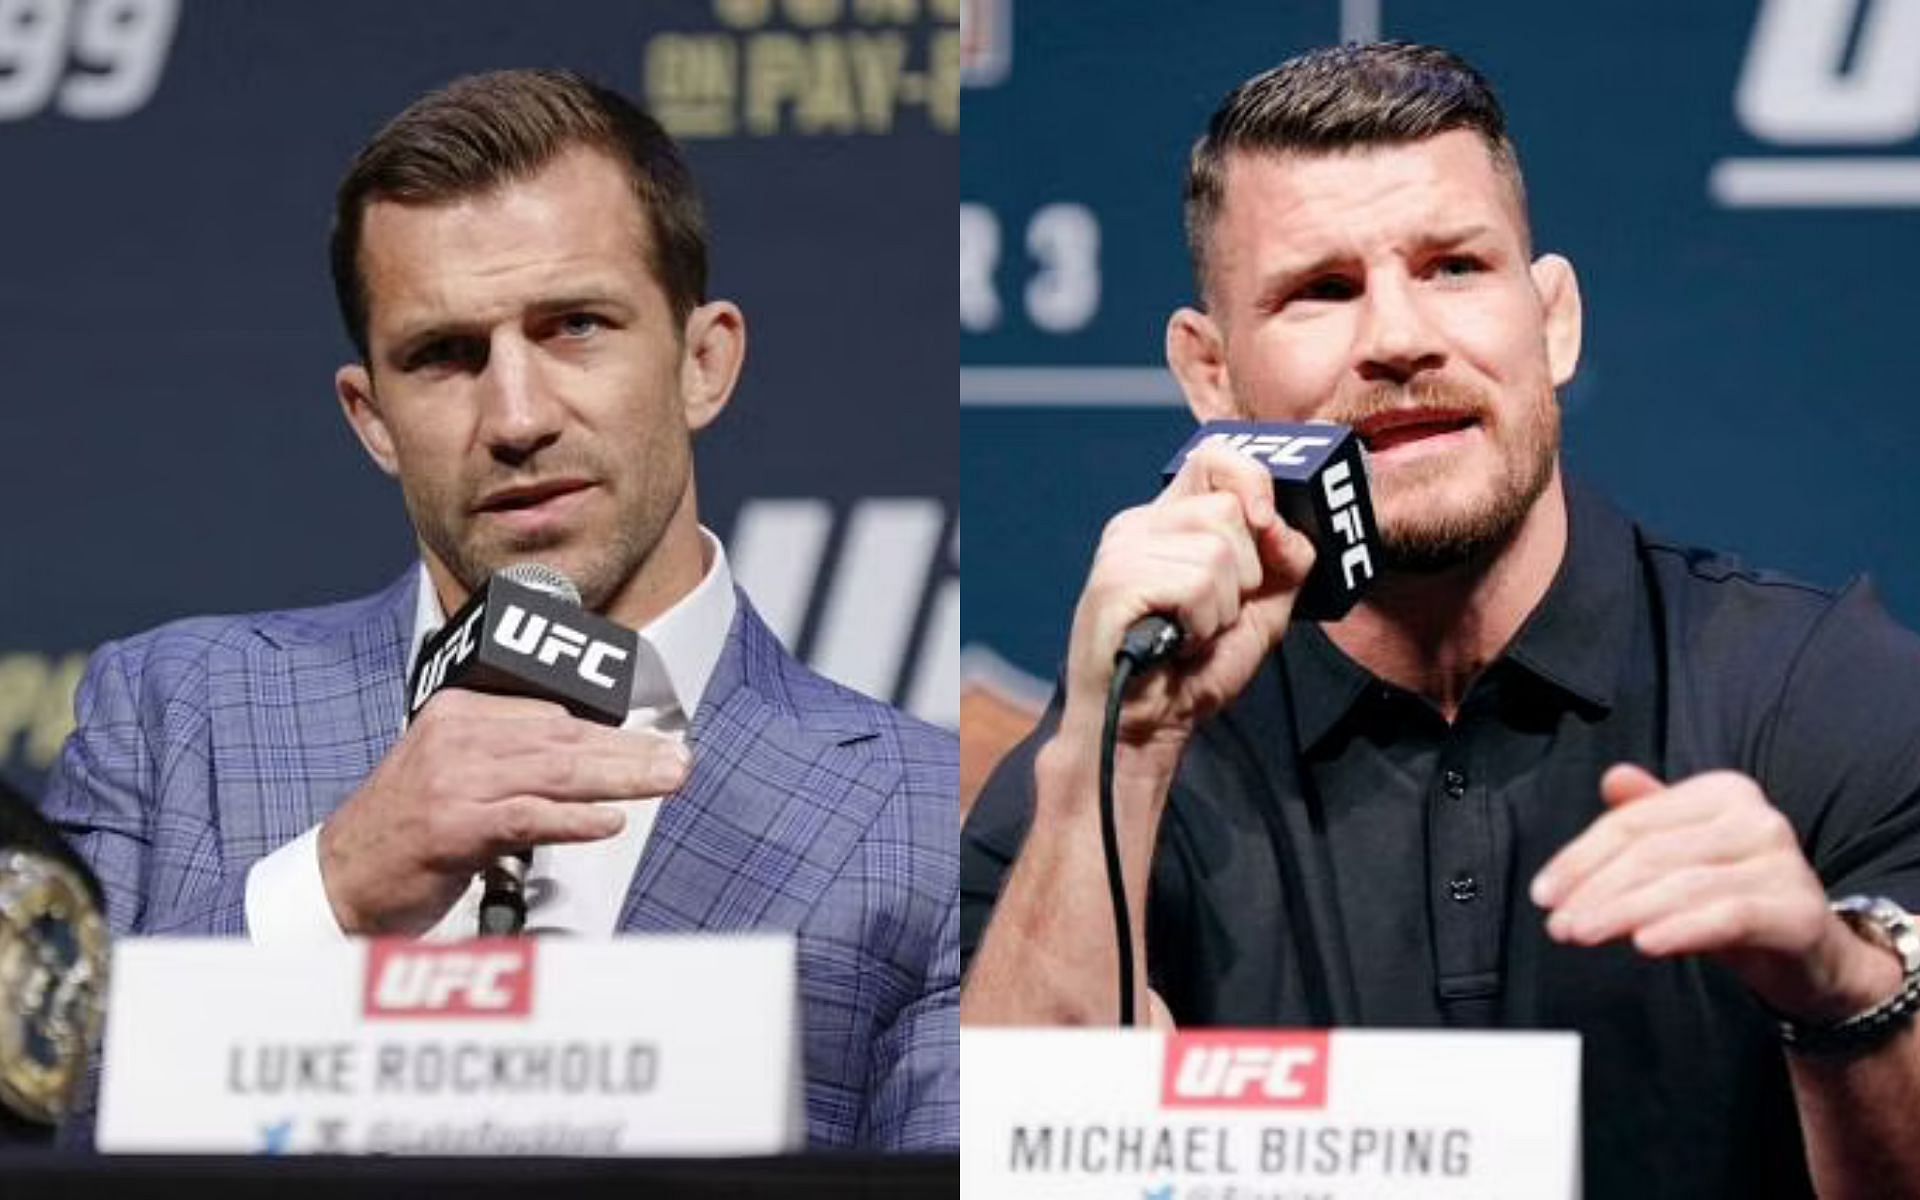 Luke Rockhold (left) and Michael Bisping (right)